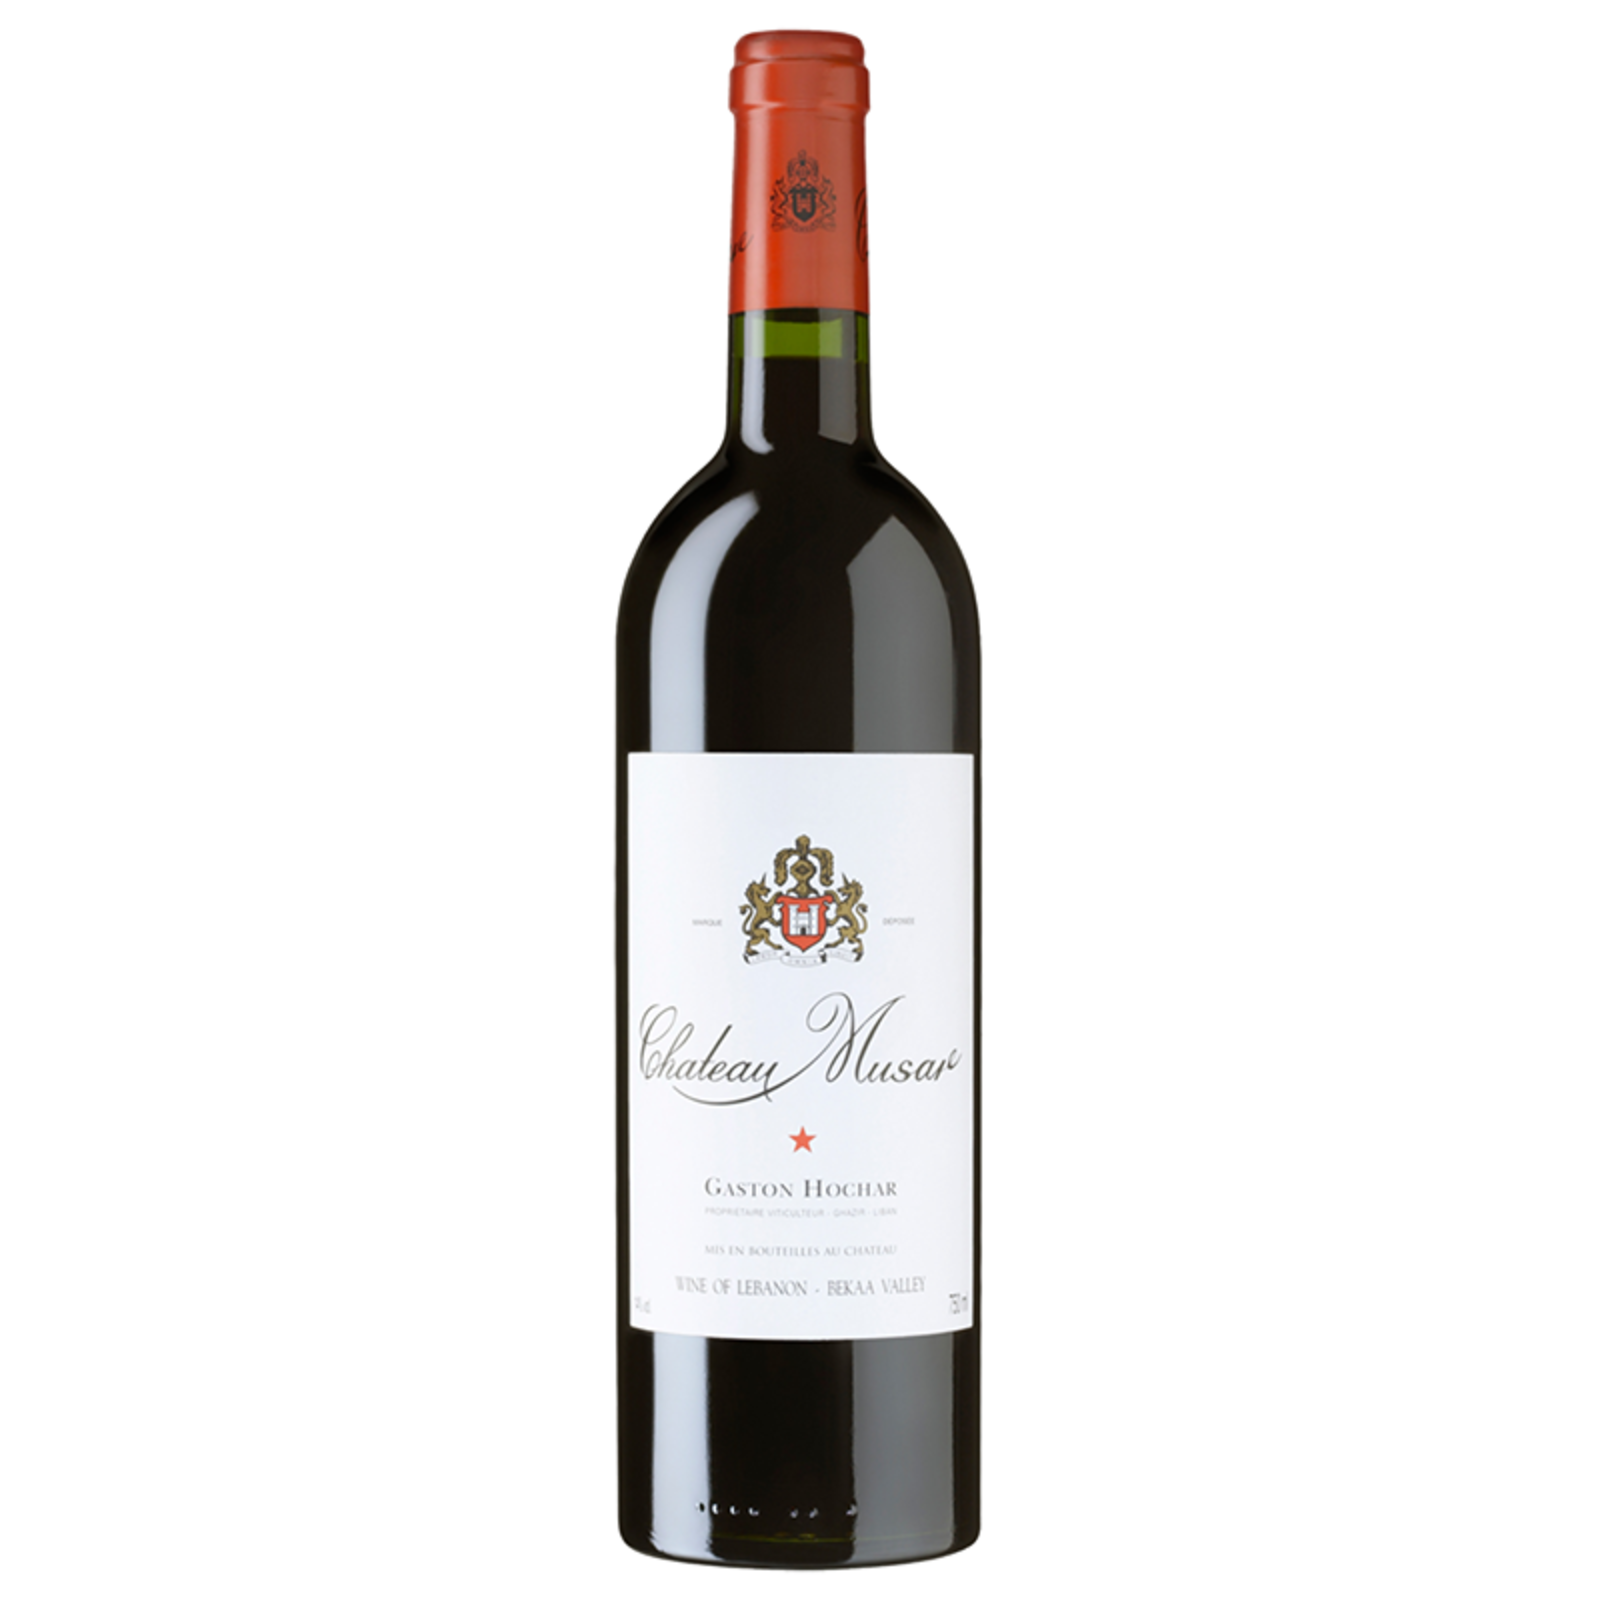 Chateau Musar Chateau Musar Bekaa Valley 2015